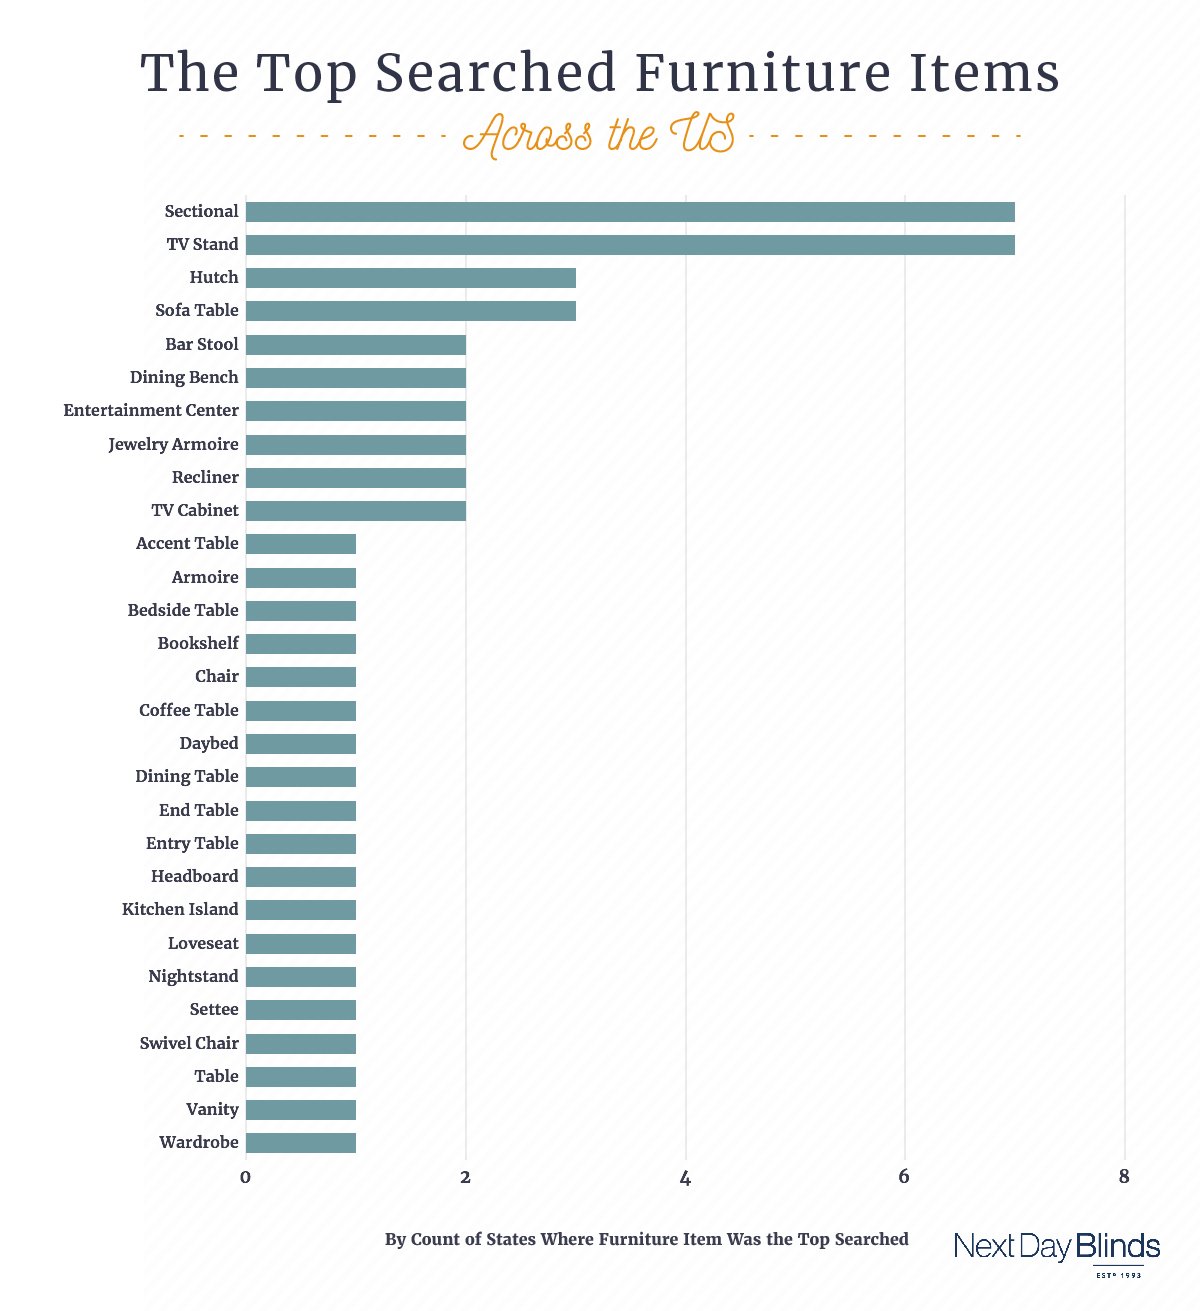 Furniture-By-State-02-1